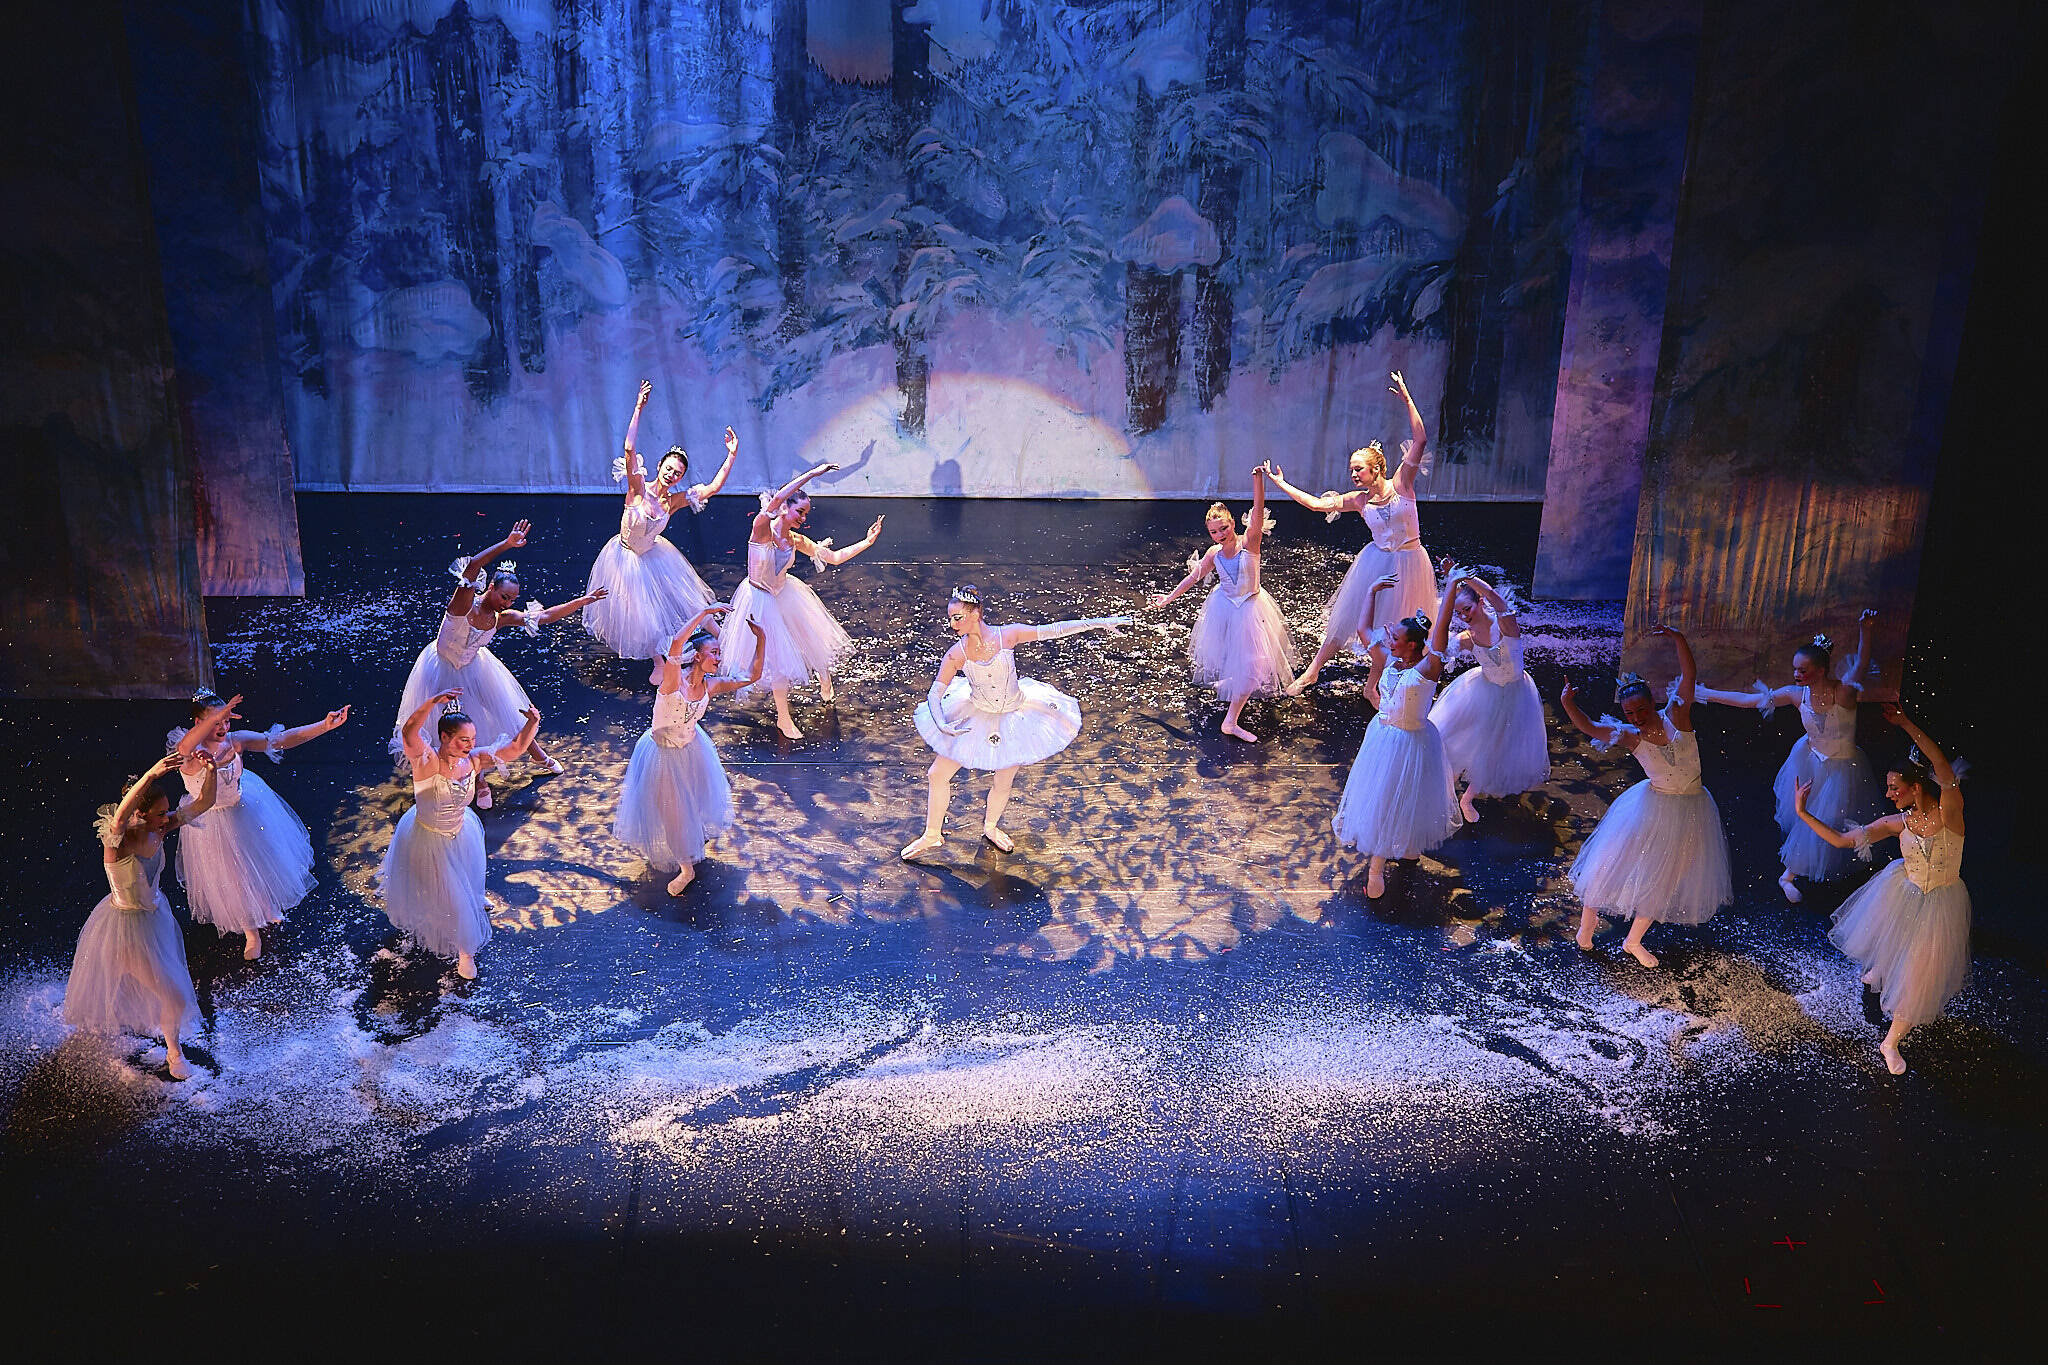 Photo by Christopher Kincaid
Dancers perform on Friday, Dec. 2, 2022, for the Homer Nutcracker Ballet held at the Mariner Theatre in Homer, Alaska.